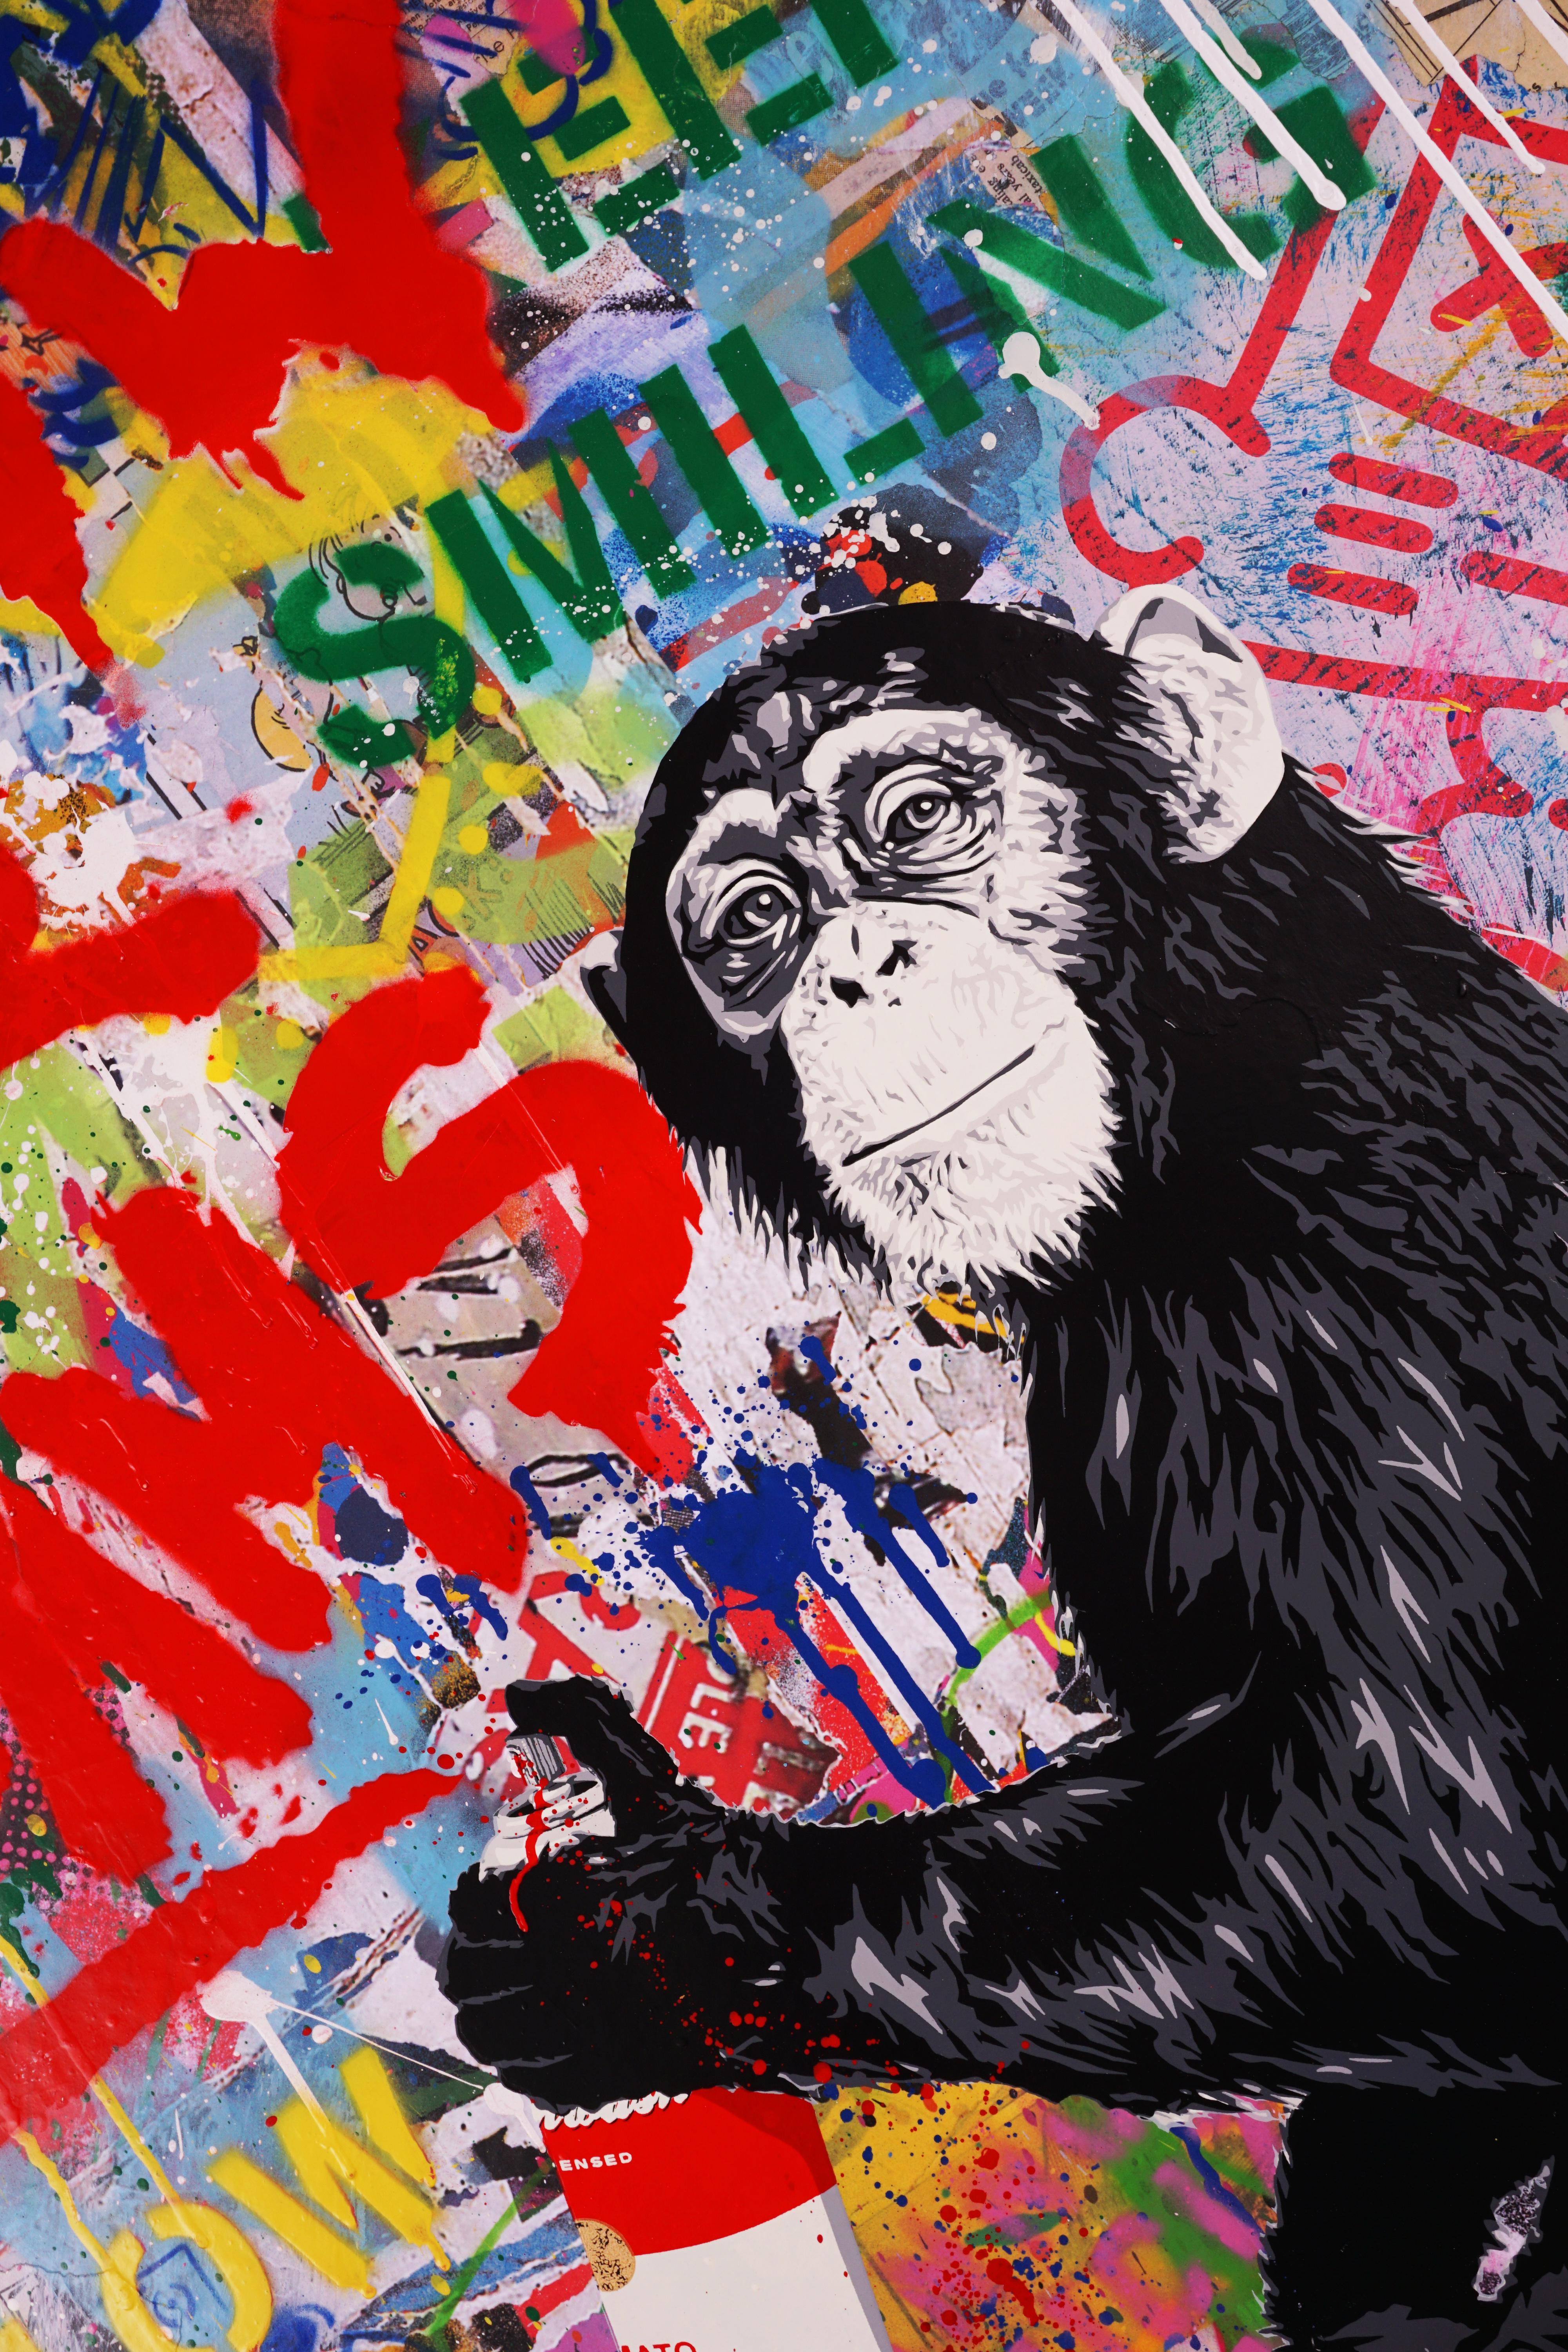 The unique street pop art 'Follow Your Dreams' monkey painting by french contemporary street-artist, Mr. Brainwash was created in 2021. The brightly spray painted, layered, and paint dripped signature style of the contemporary artist has become an